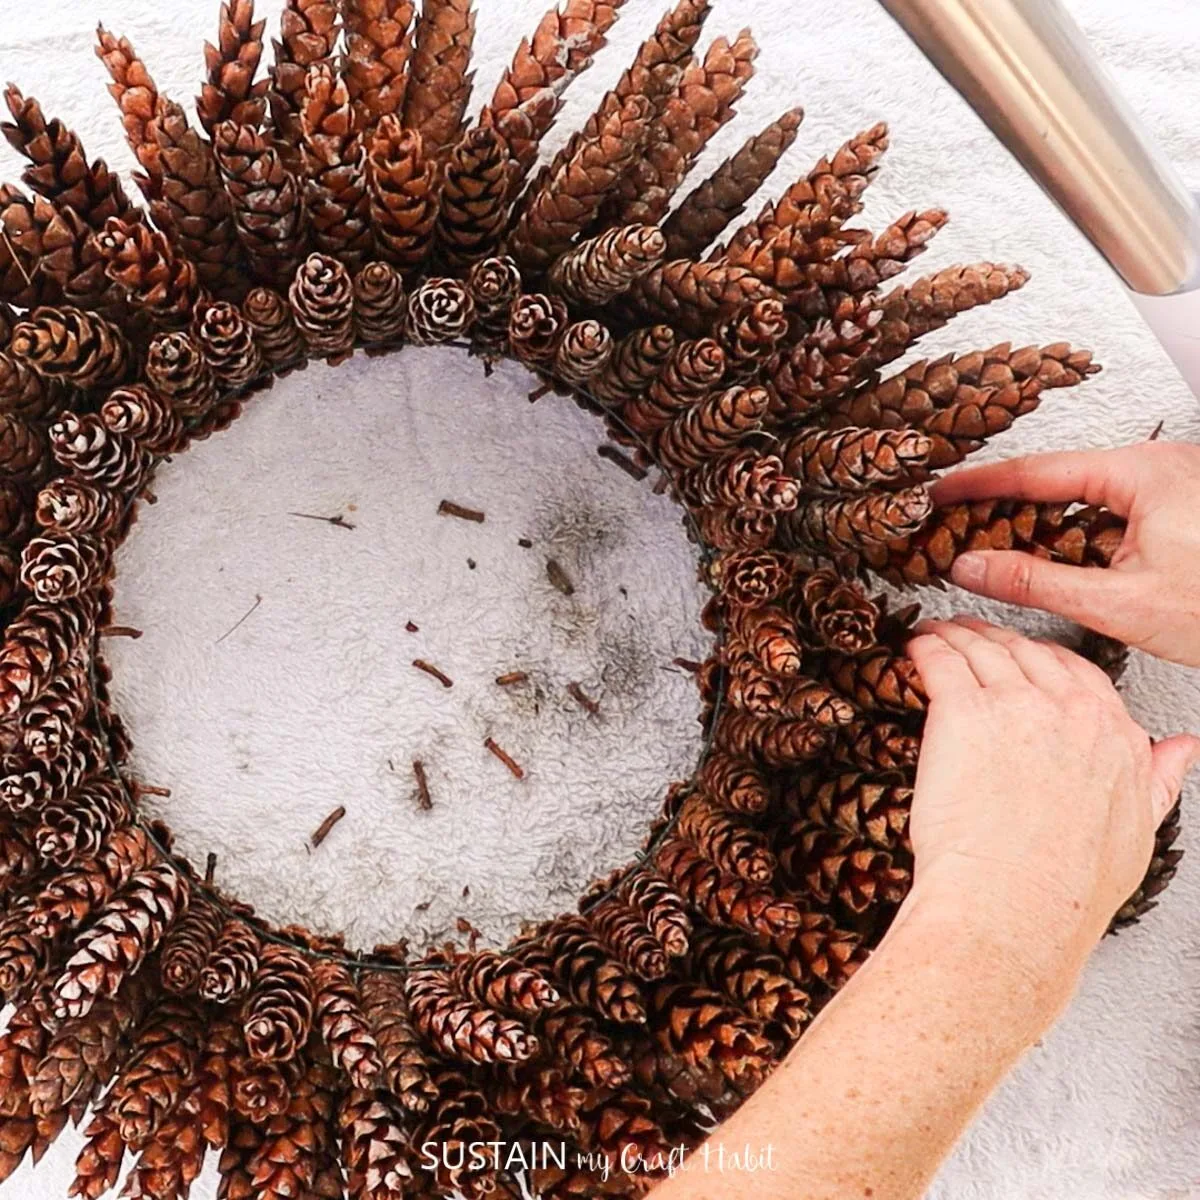 Adding the last pinecone to the wreath.